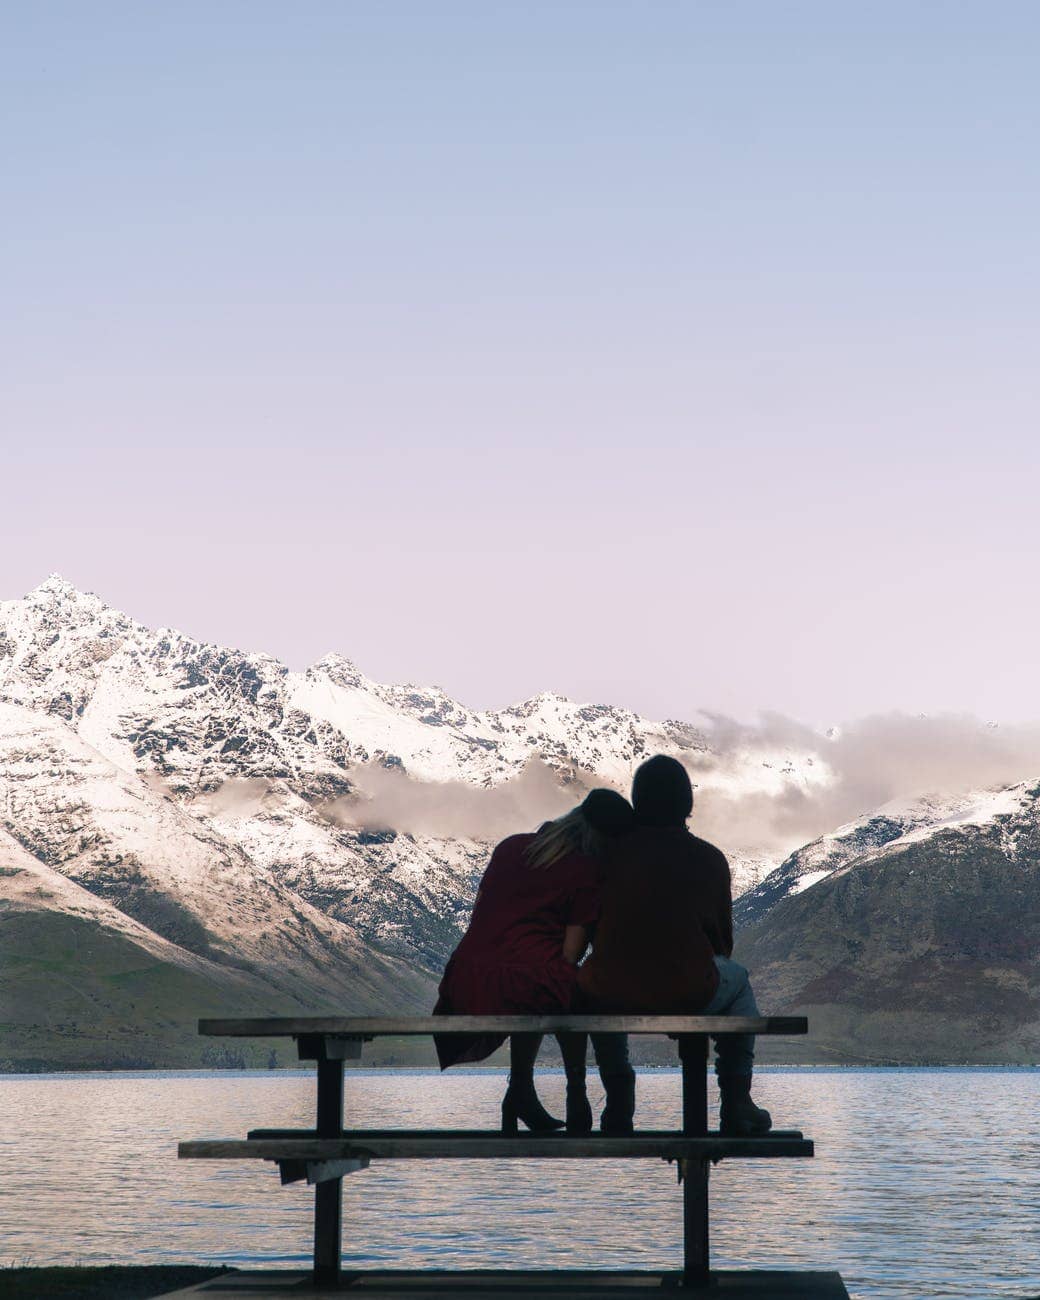 romantic couple sitting on bench and admiring lake and mountains